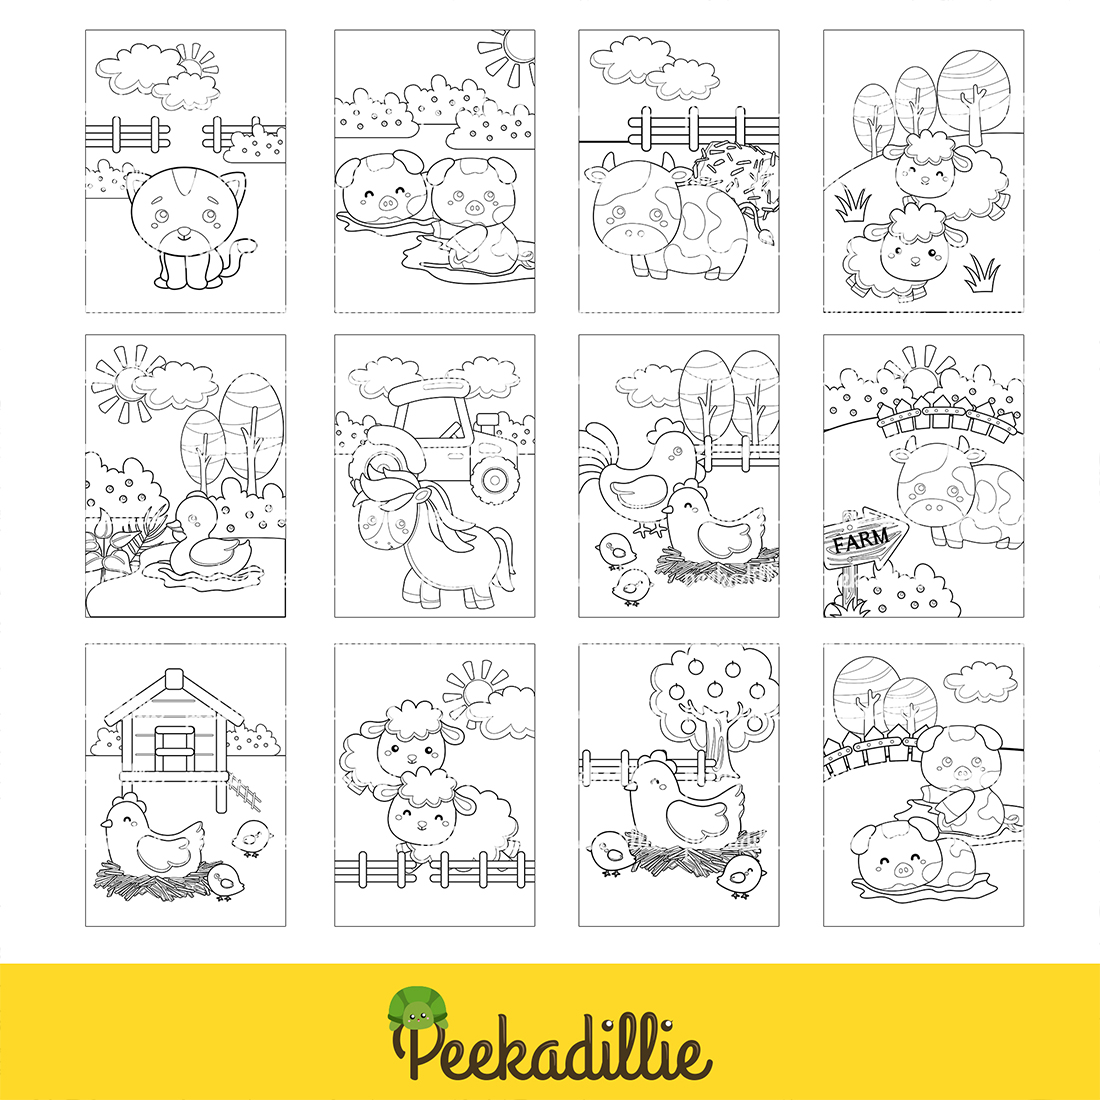 Cute Farm Animals Like Sheep Cow Horse Chicken Pig Nature and Farmer Tractor Coloring for Kids and Adult preview image.